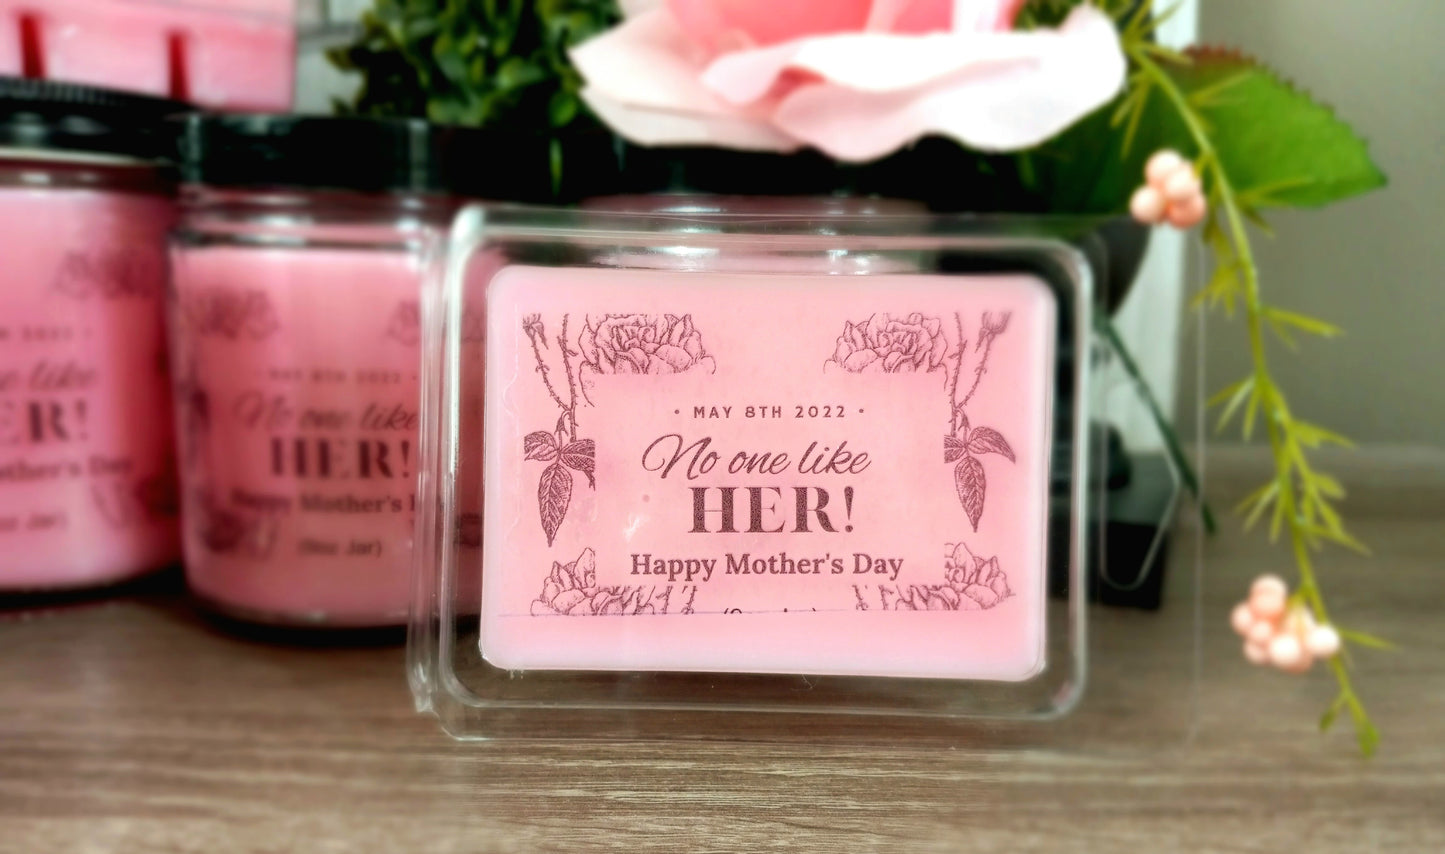 No one like "Her" Candle